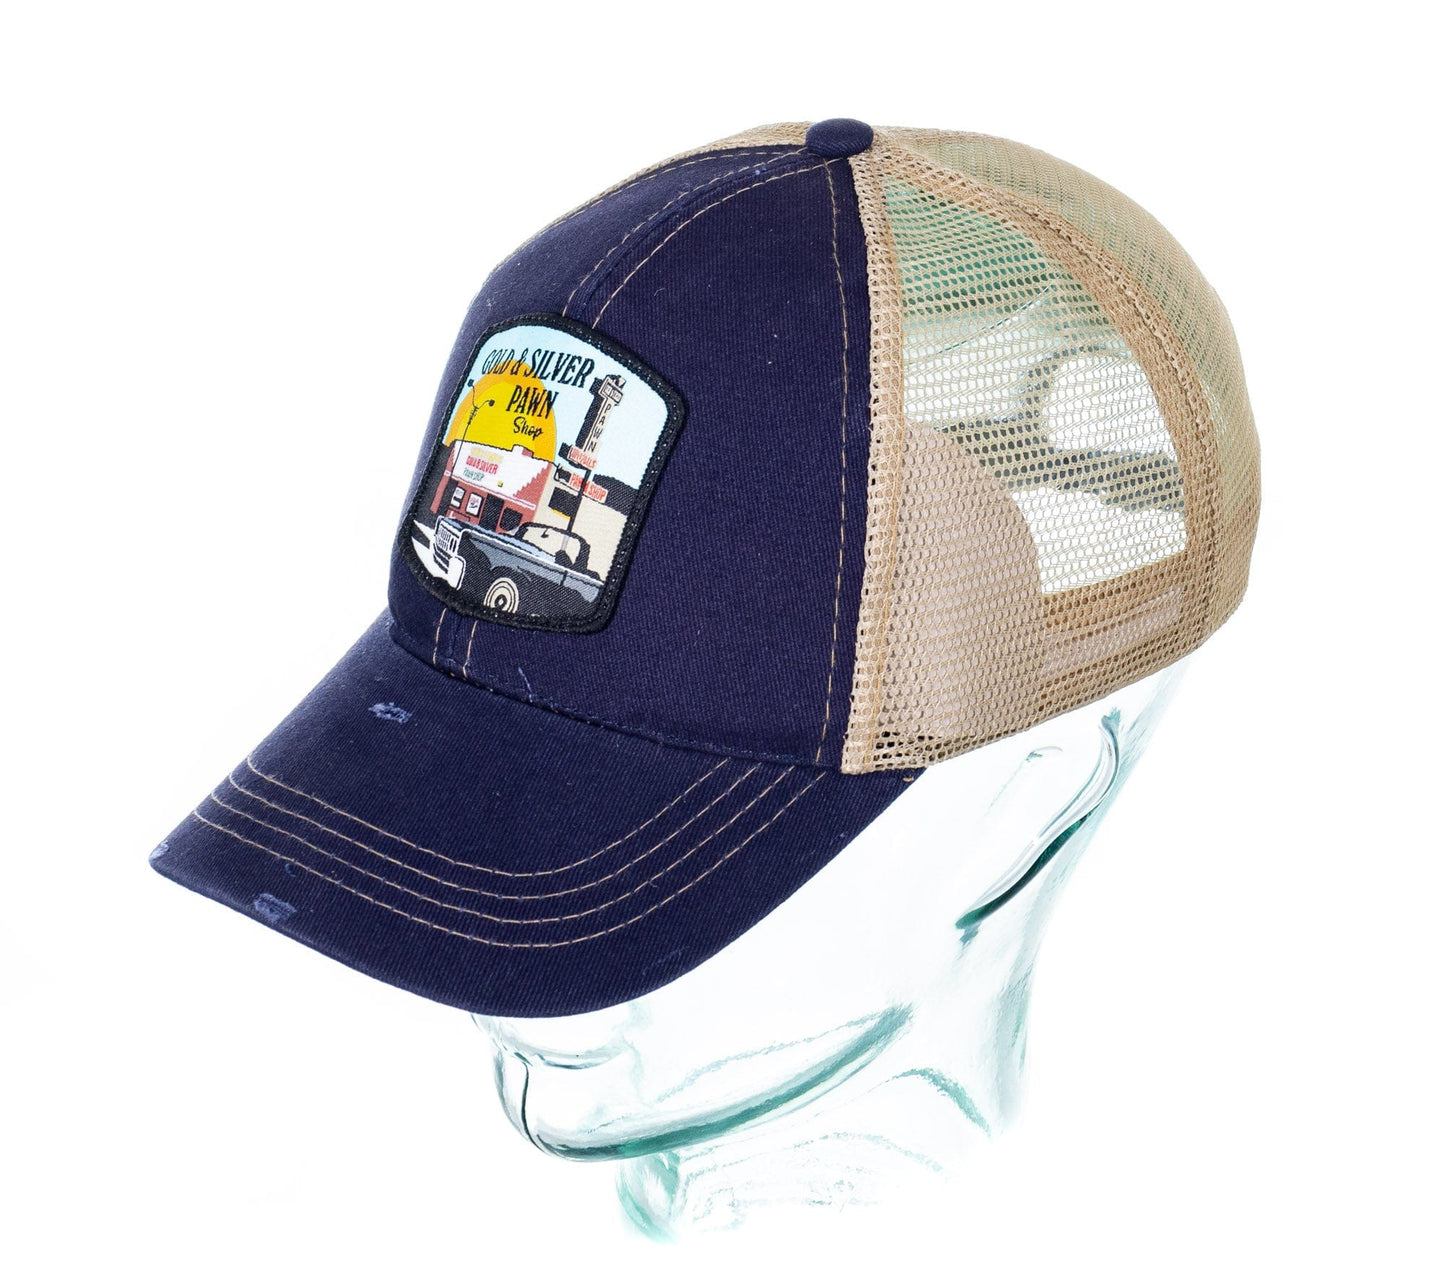 Gold & Silver Pawn Shop Adjustable Two-Tone Truckers Hat Side Front